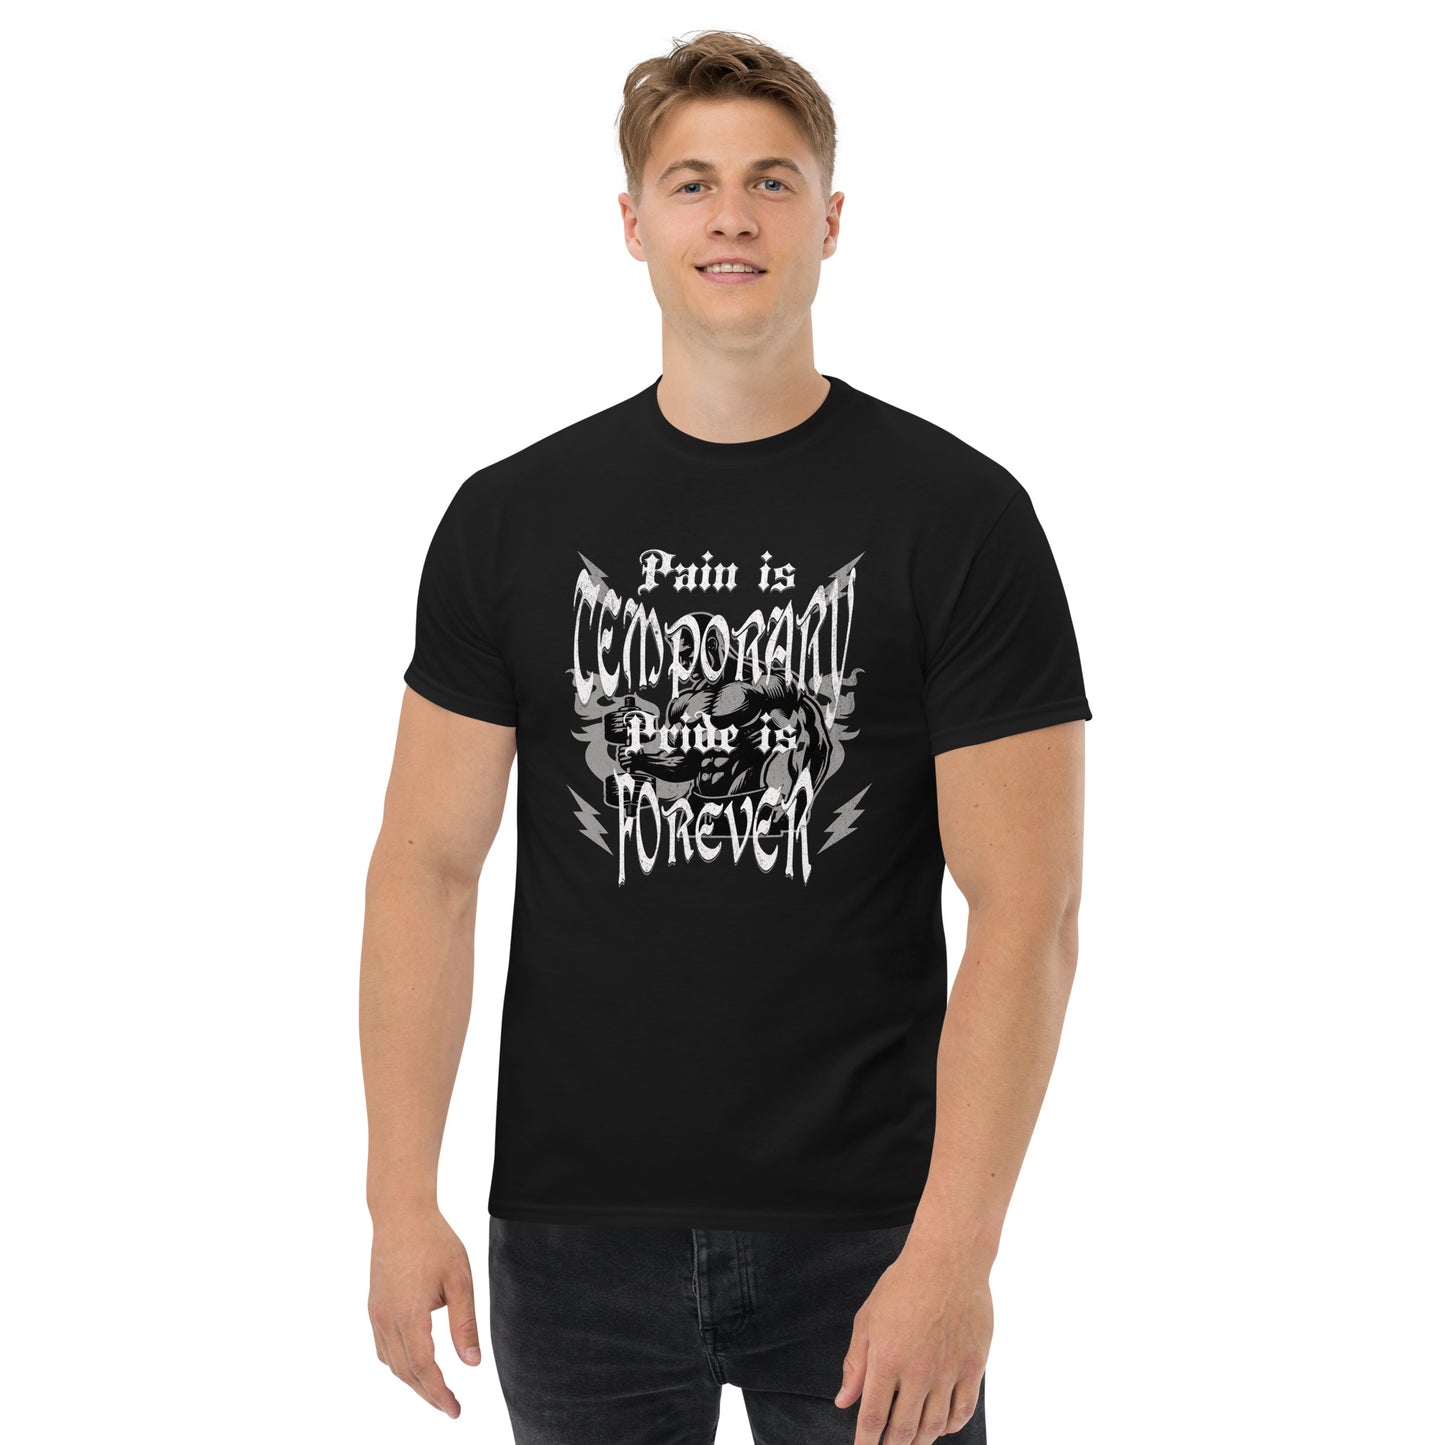 Pain is Temporary, Pride is Forever Men's T-Shirt - Black